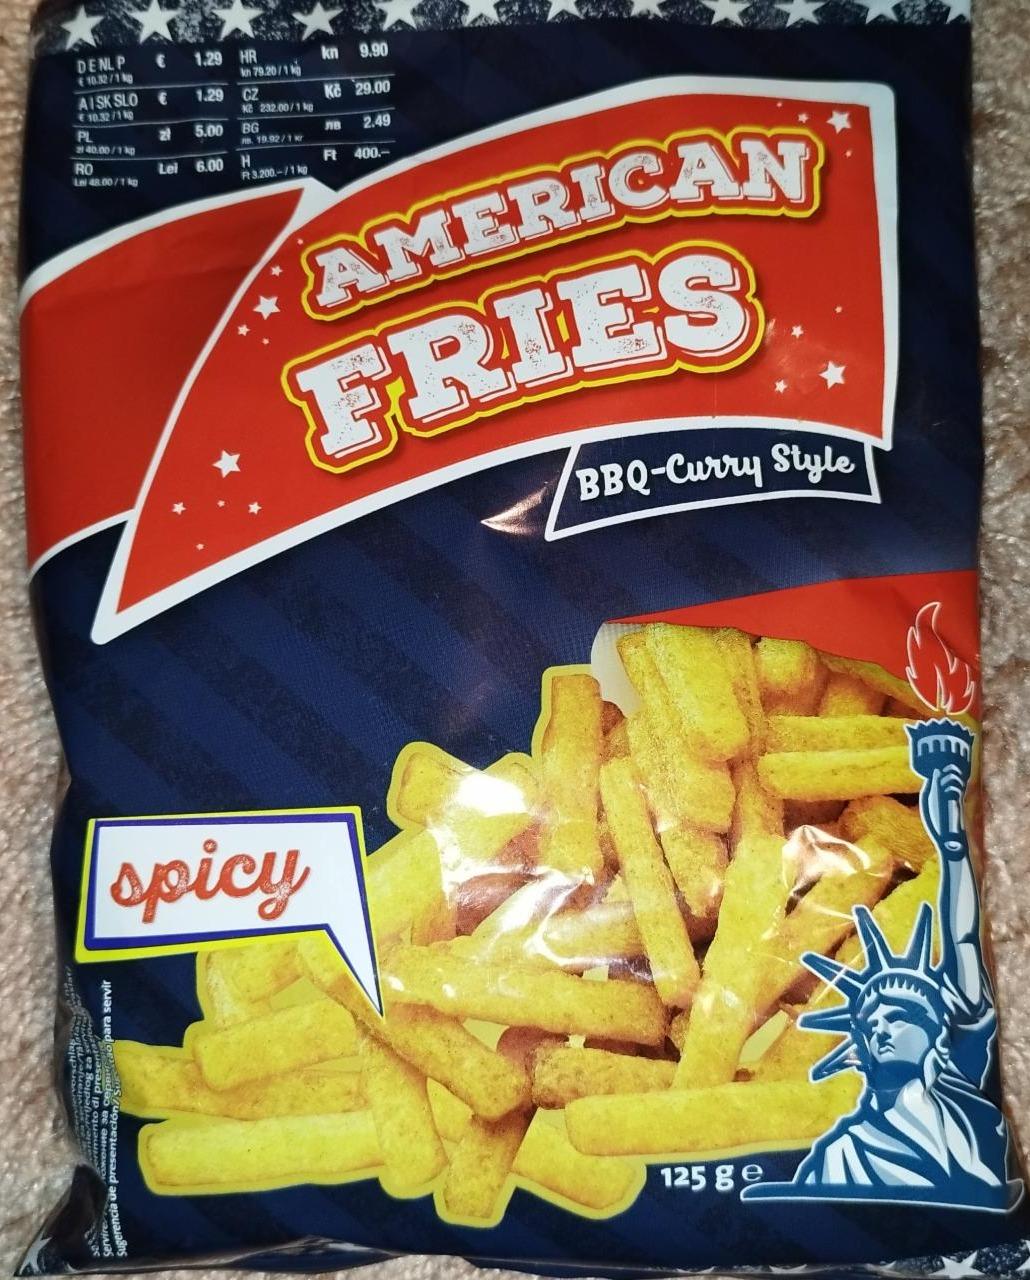 Fotografie - American Fries BBQ-Curry Style spicy